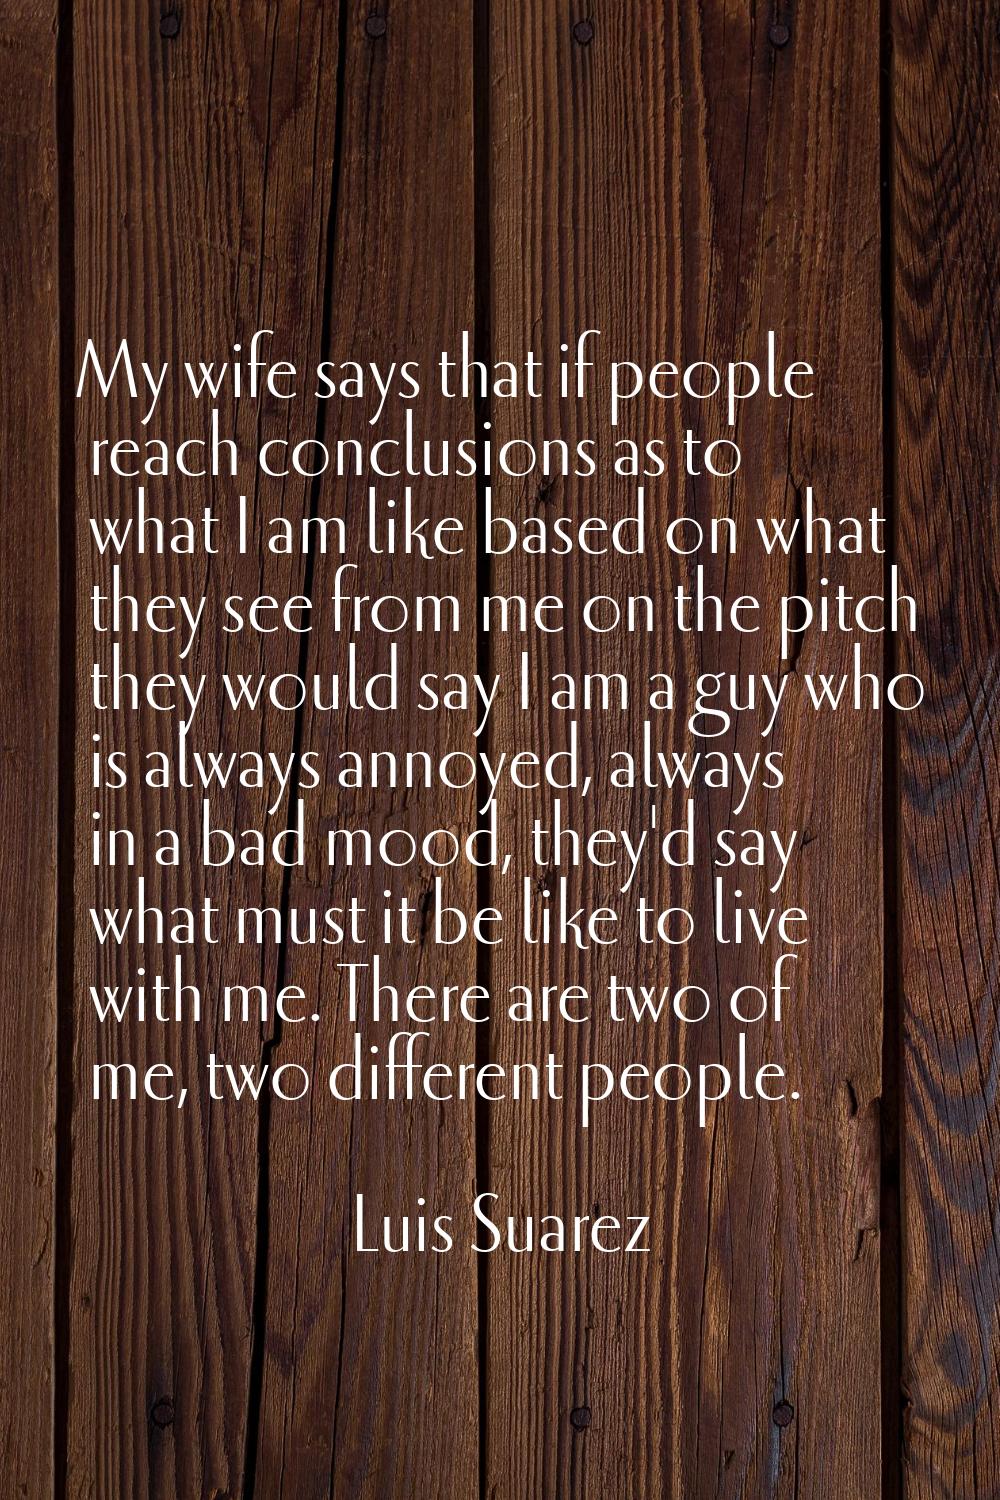 My wife says that if people reach conclusions as to what I am like based on what they see from me o